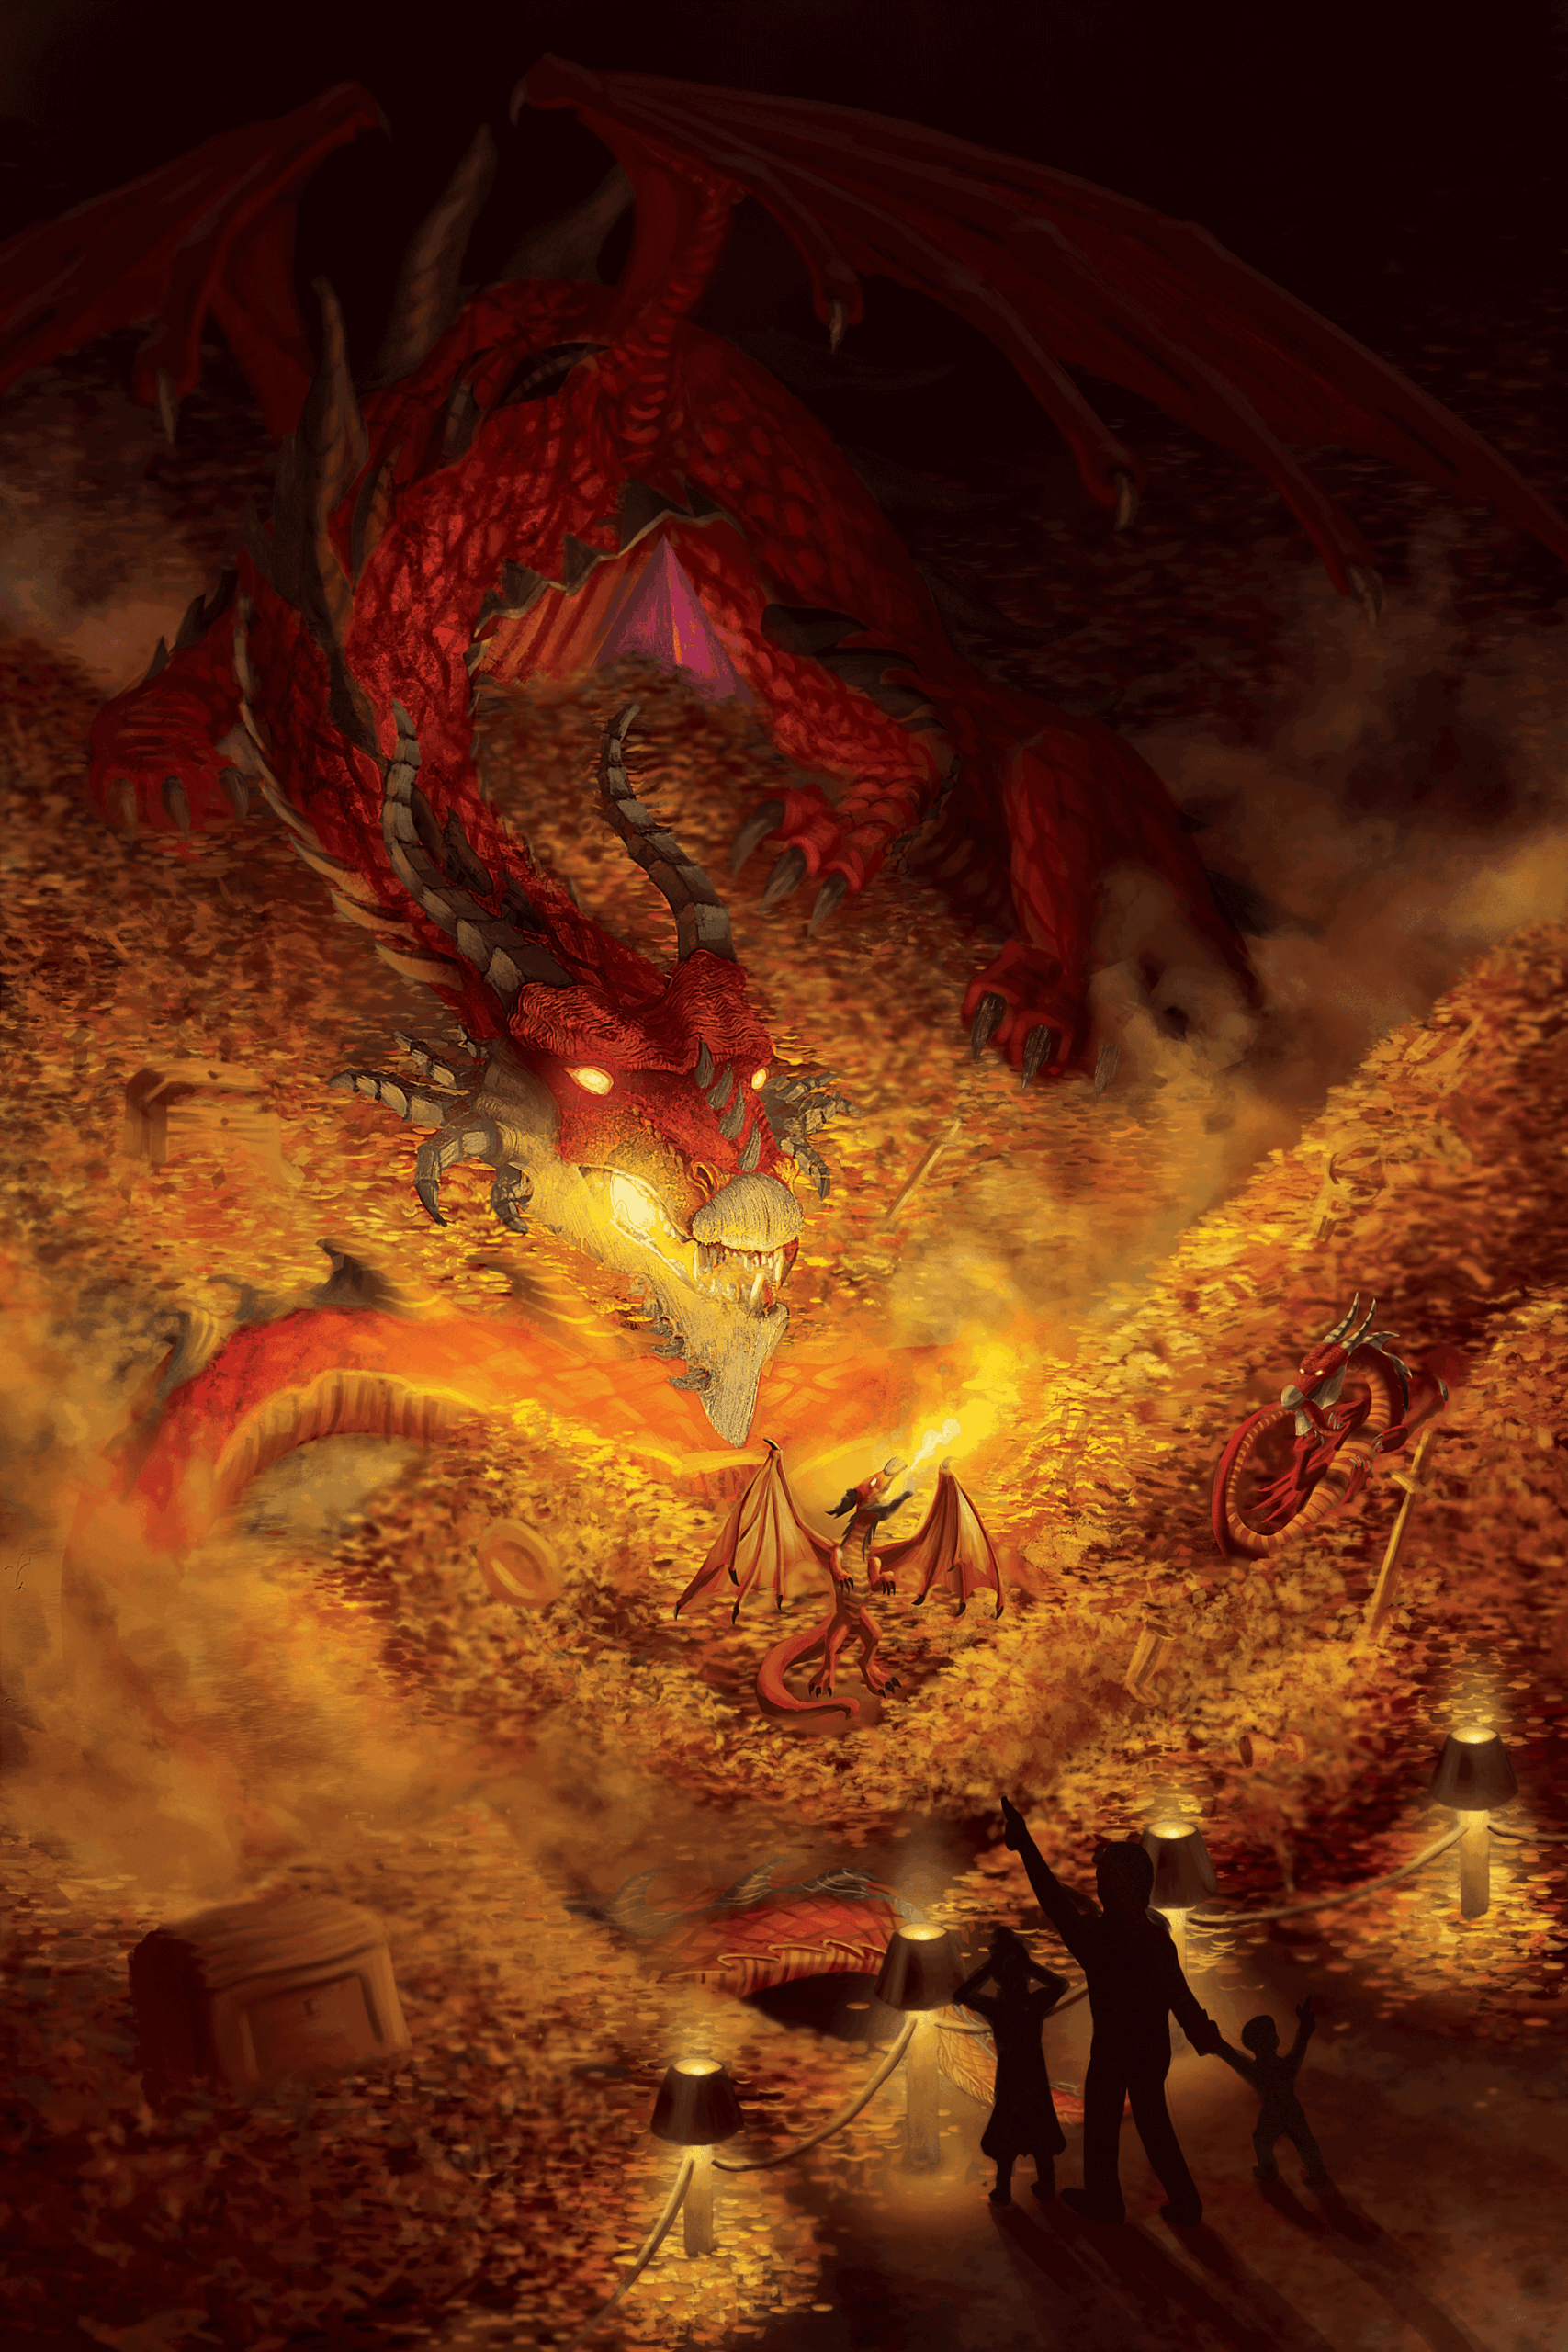 A painting of the Andrew-Gaia-Dragon